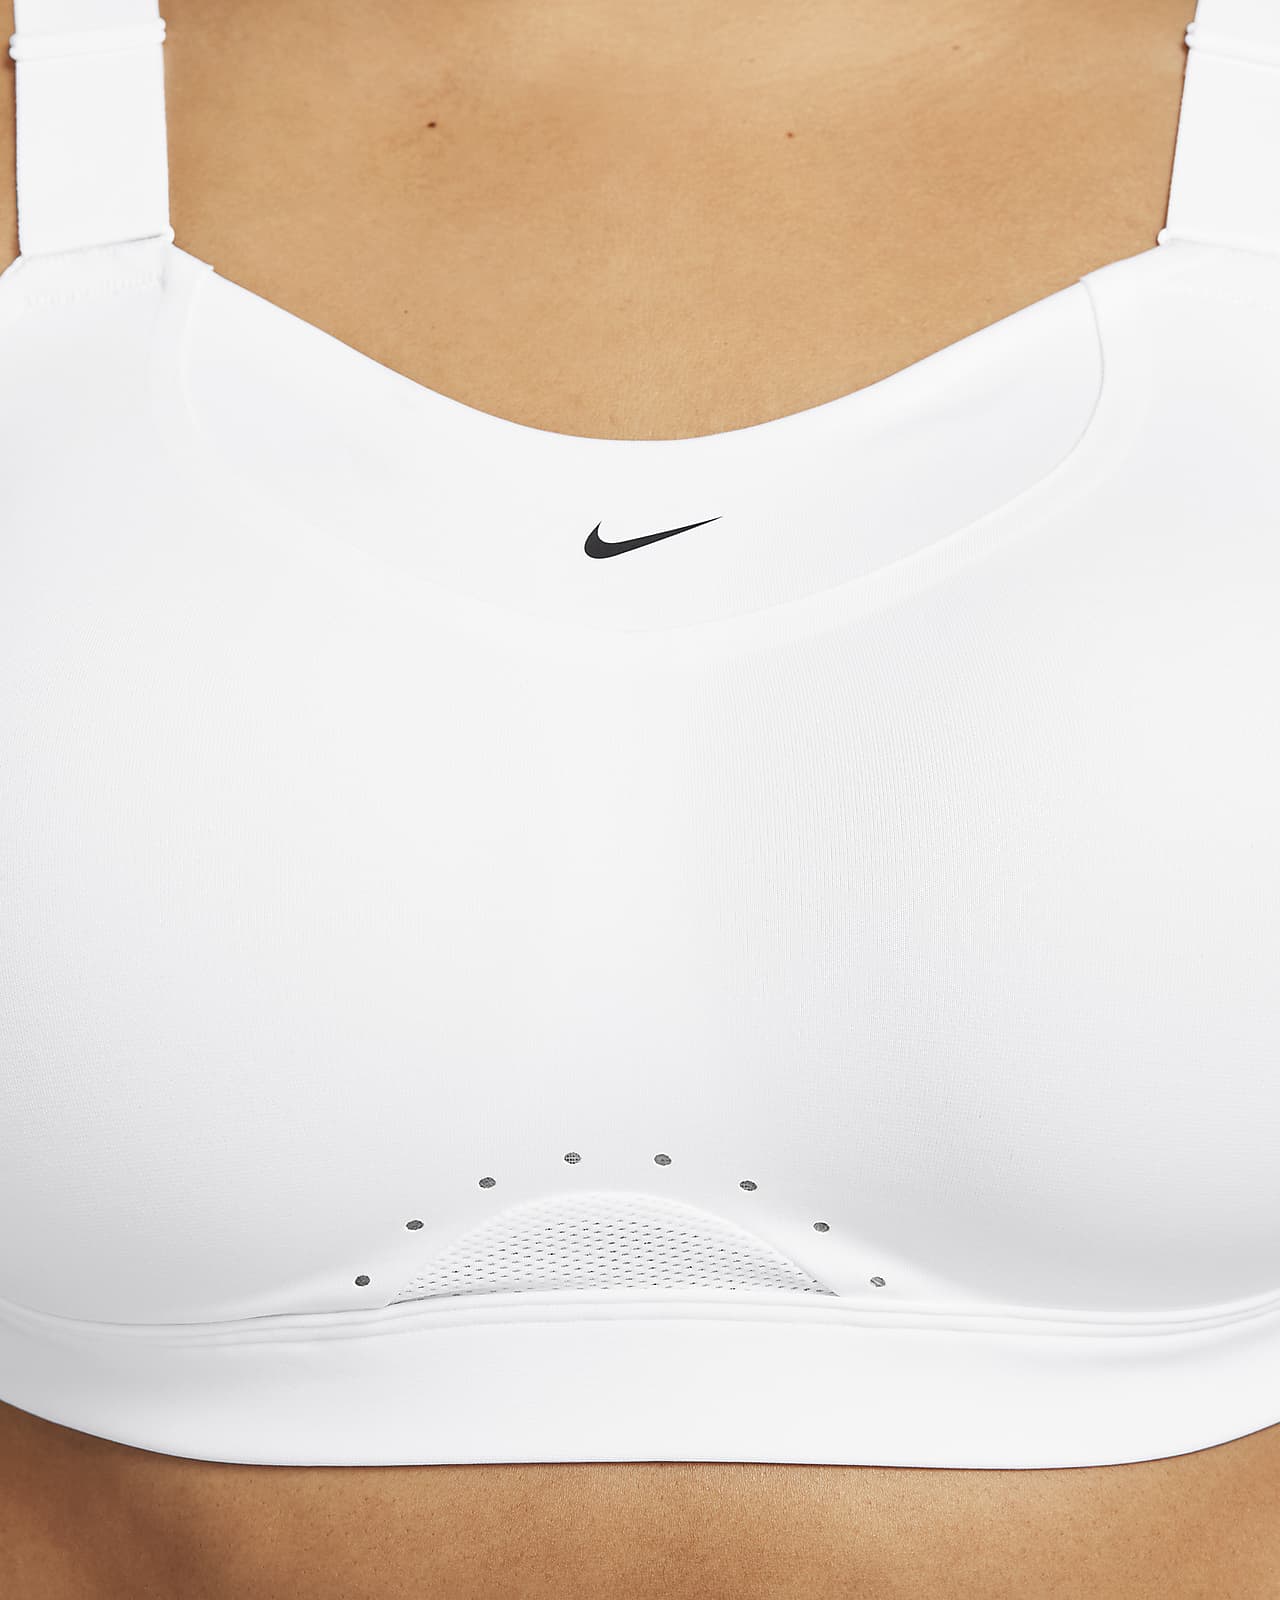 High Support Sports Bras. Nike CA